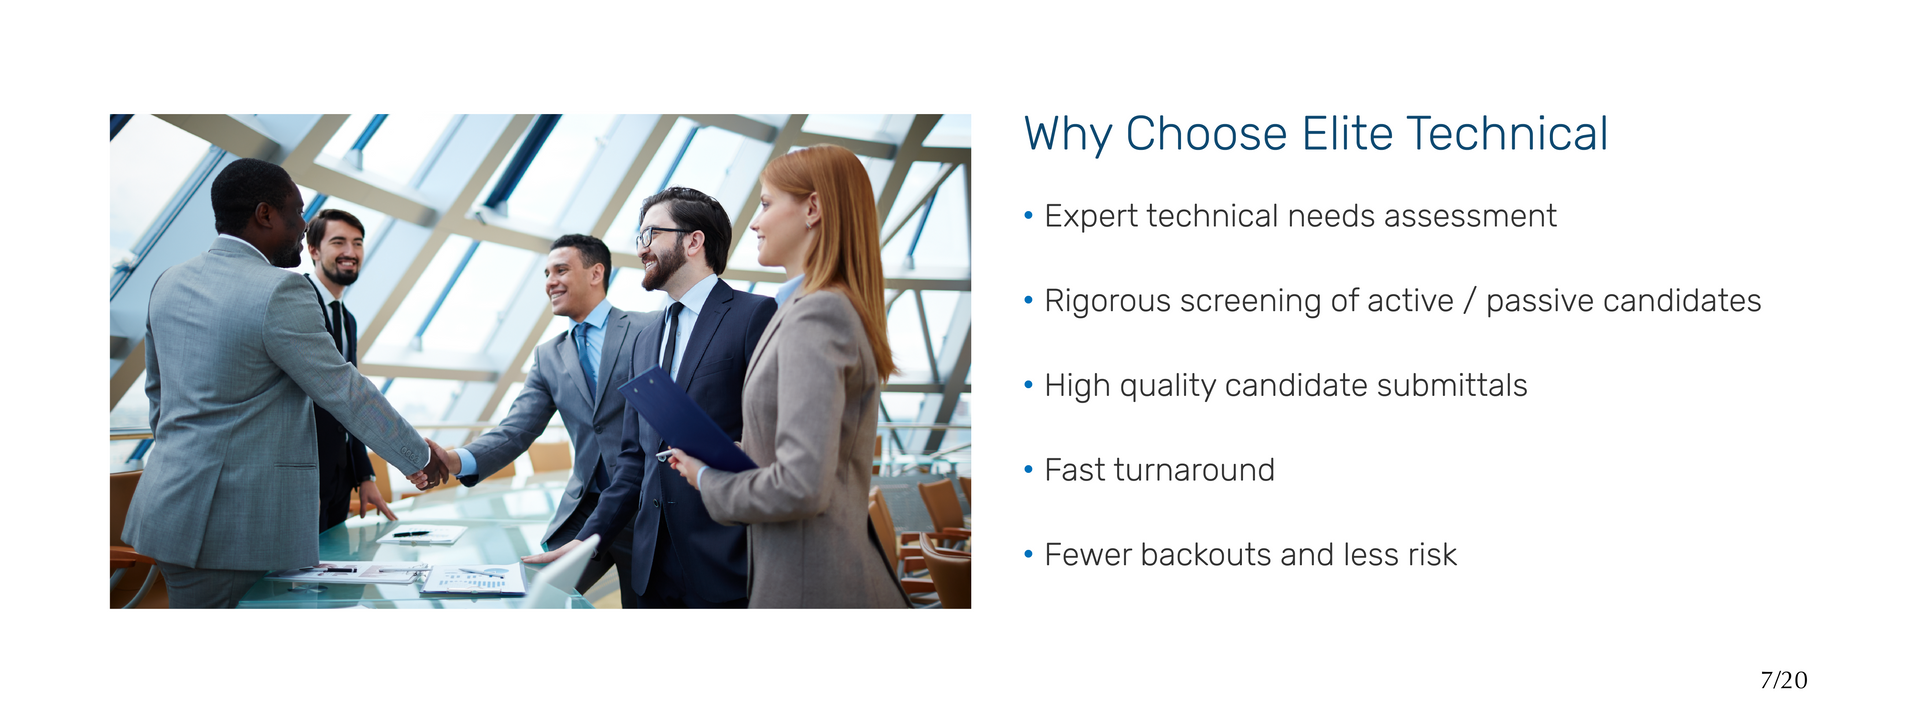 Choose Elite Technical for fast turnaround and high quality candidates